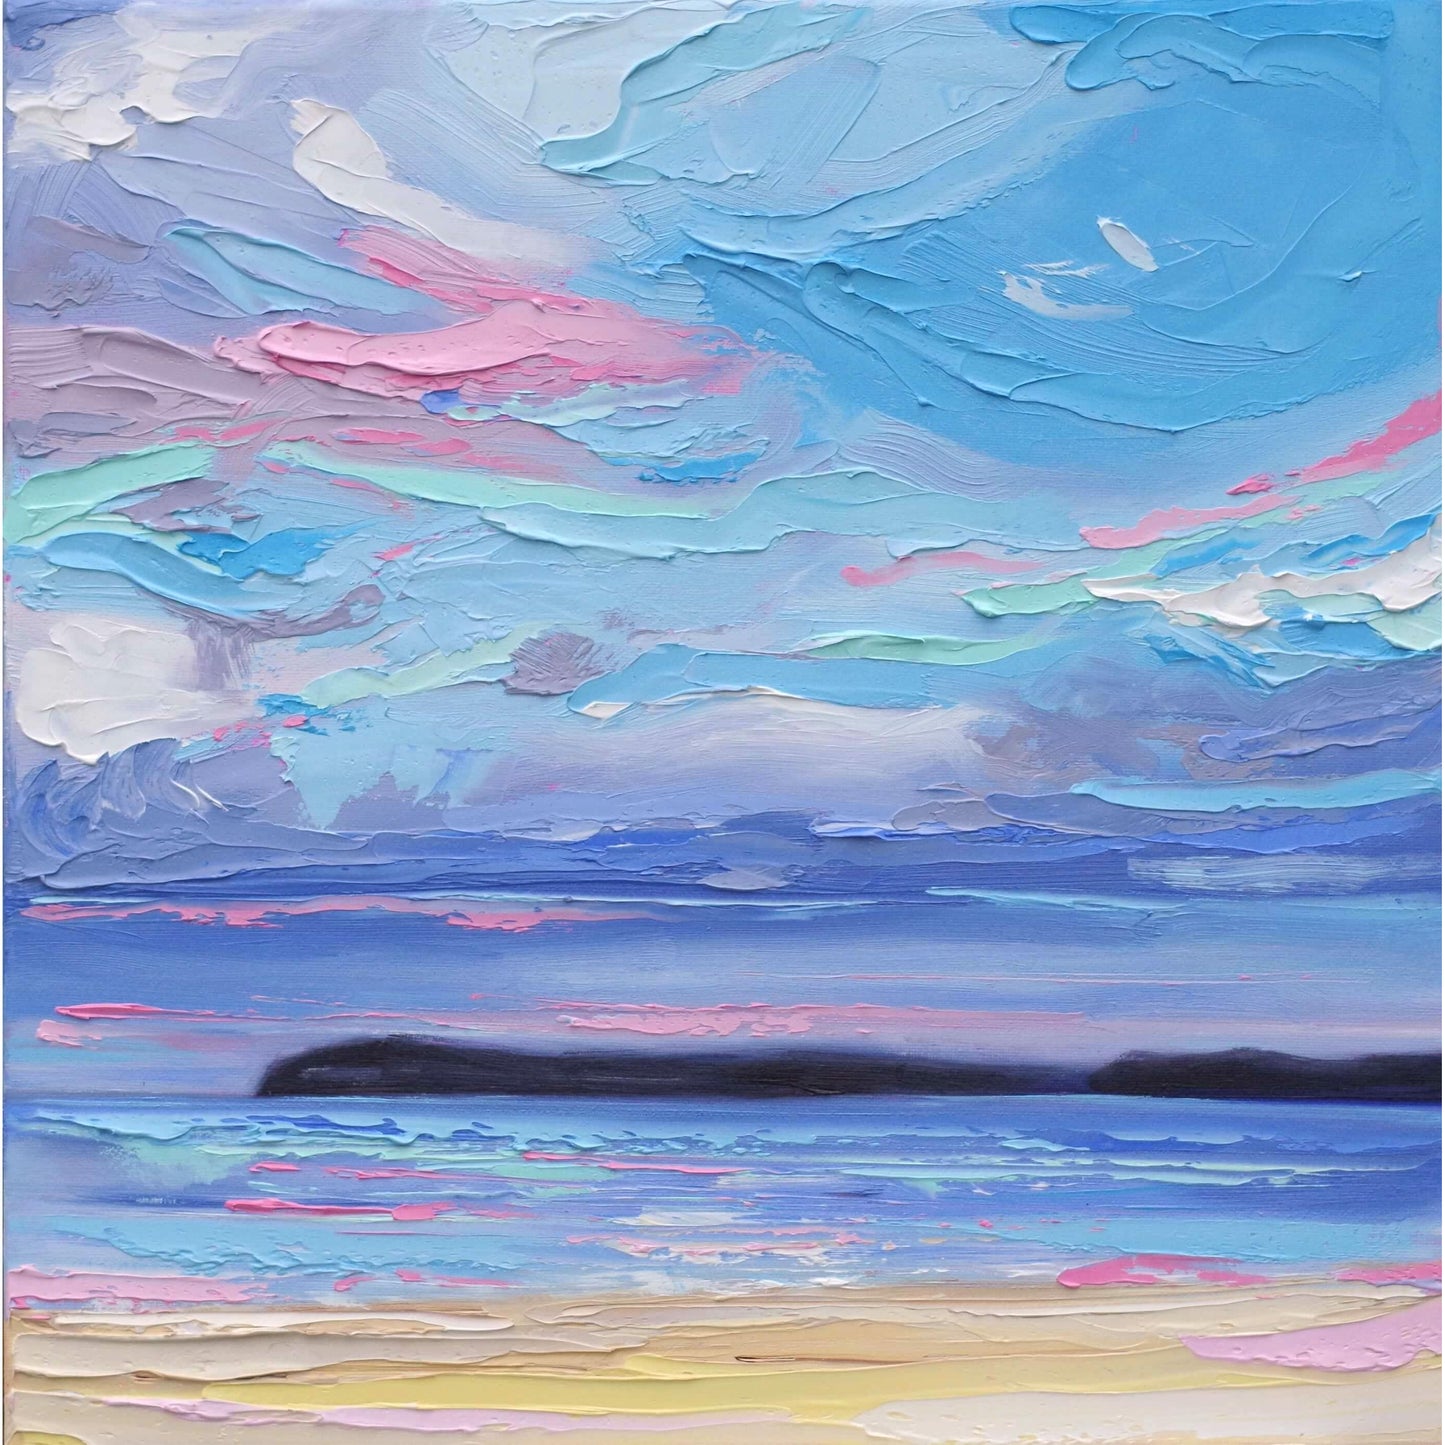 Fiona McKenna Irish Art. An original oil painting inspired by a view from Duncannon, Co. Wexford, Ireland. Painted with thick oil paints using a palette knife and showing dramatic, sweeping clouds above the calm waves.  12" x 12" (30cm x 30cm) on a slim canvas, unframed.